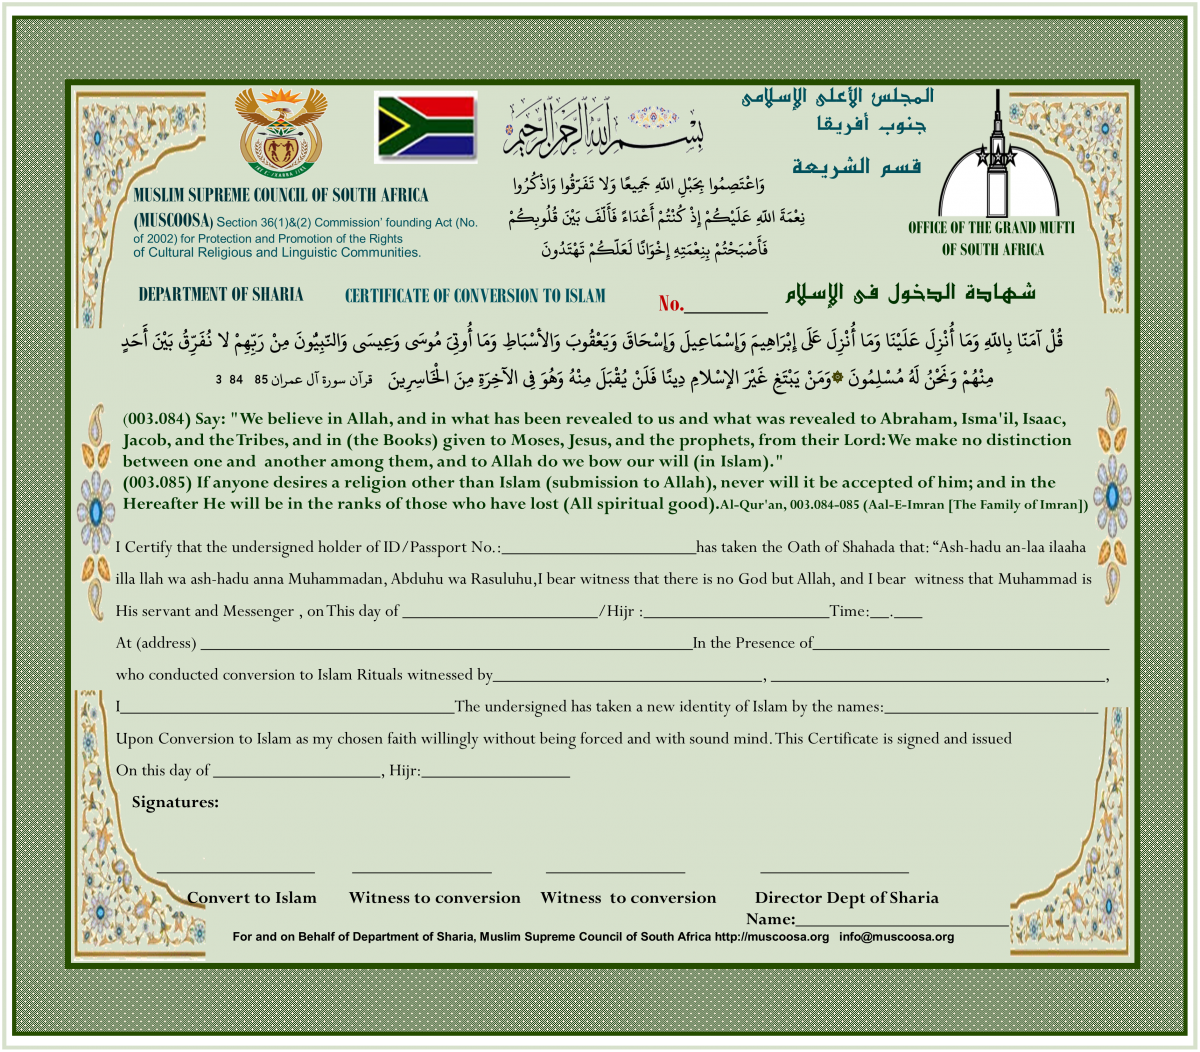 CERTIFICATE OF CONVERSION TO ISLAM DOWNLOAD